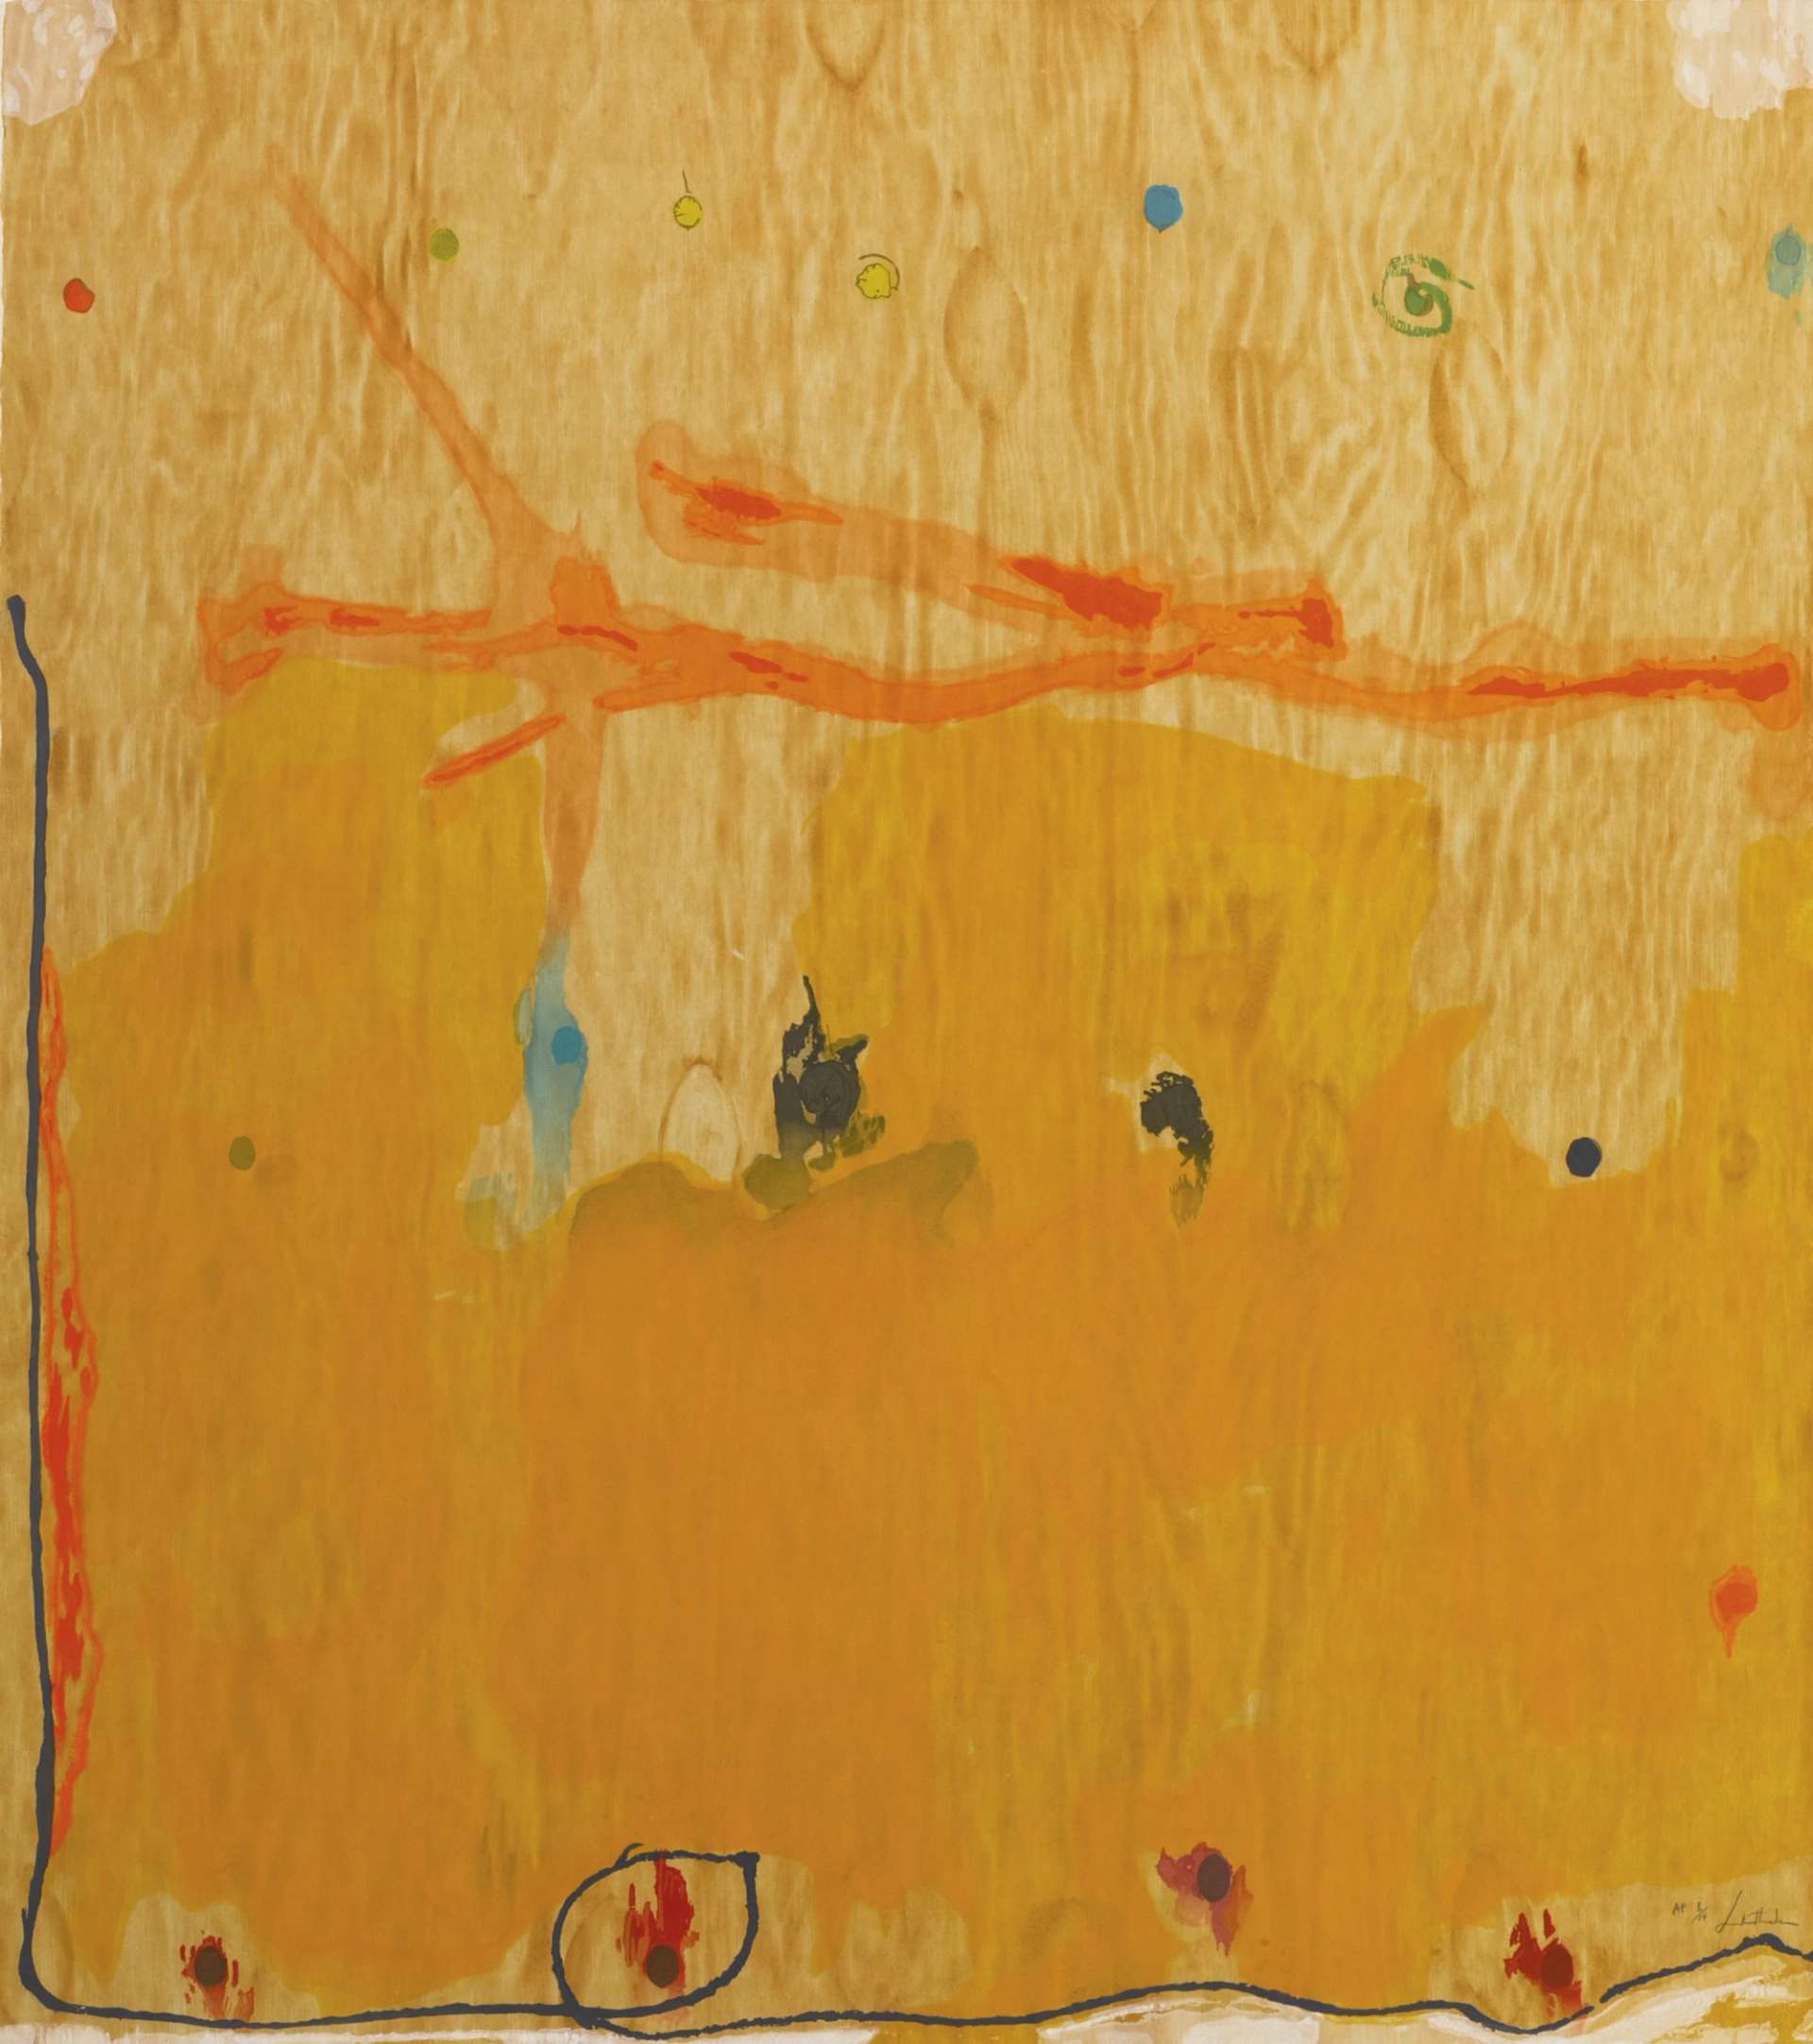 Helen Frankenthaler’s Tales Of Genji II. An abstract expressionist woodcut print of an orange based landscape with various accent colours. 